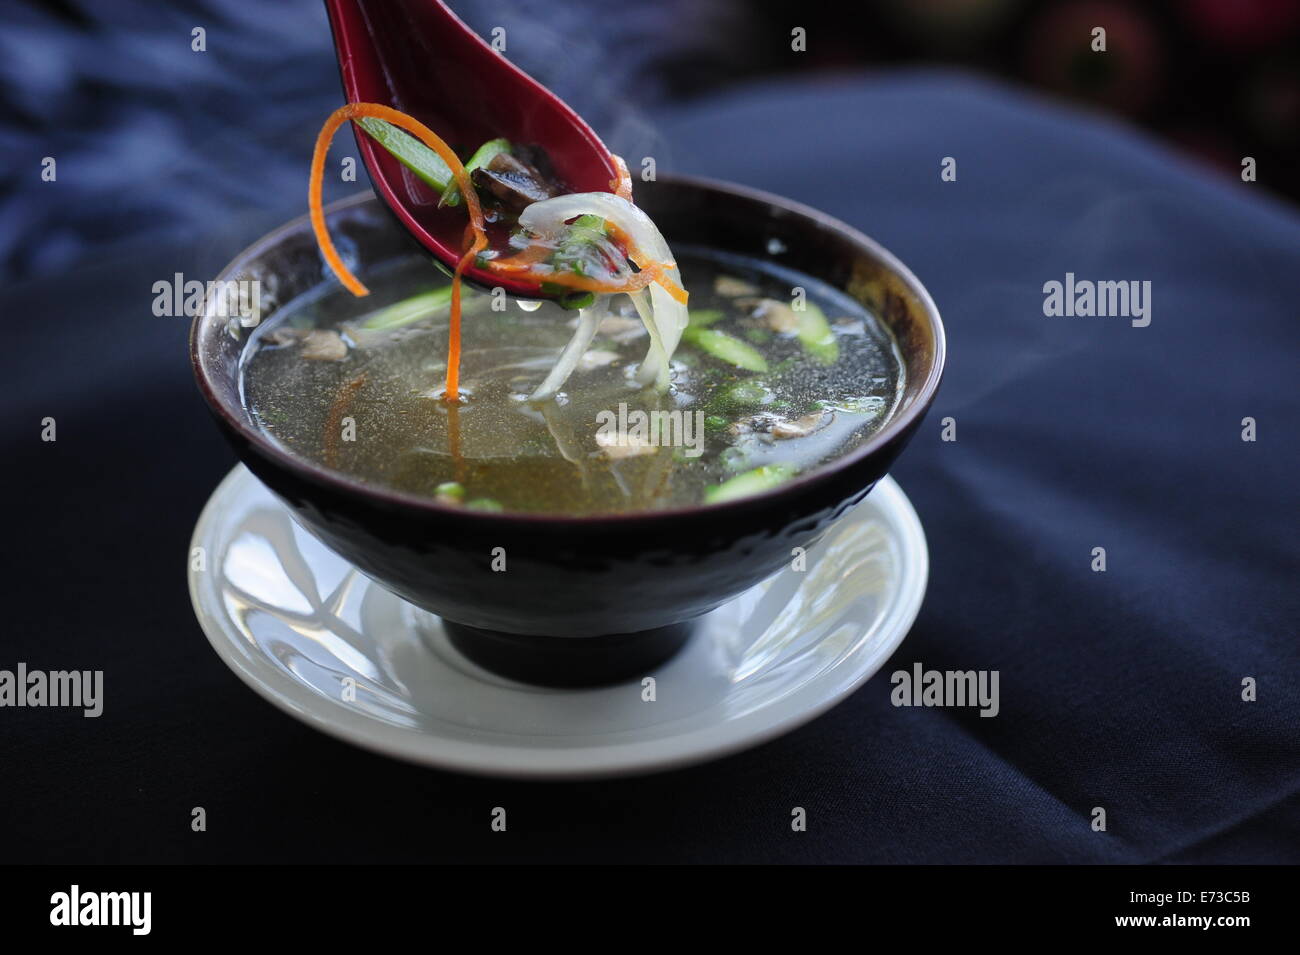 Food Asian Japanese vegan soup with vegetables miso Stock Photo